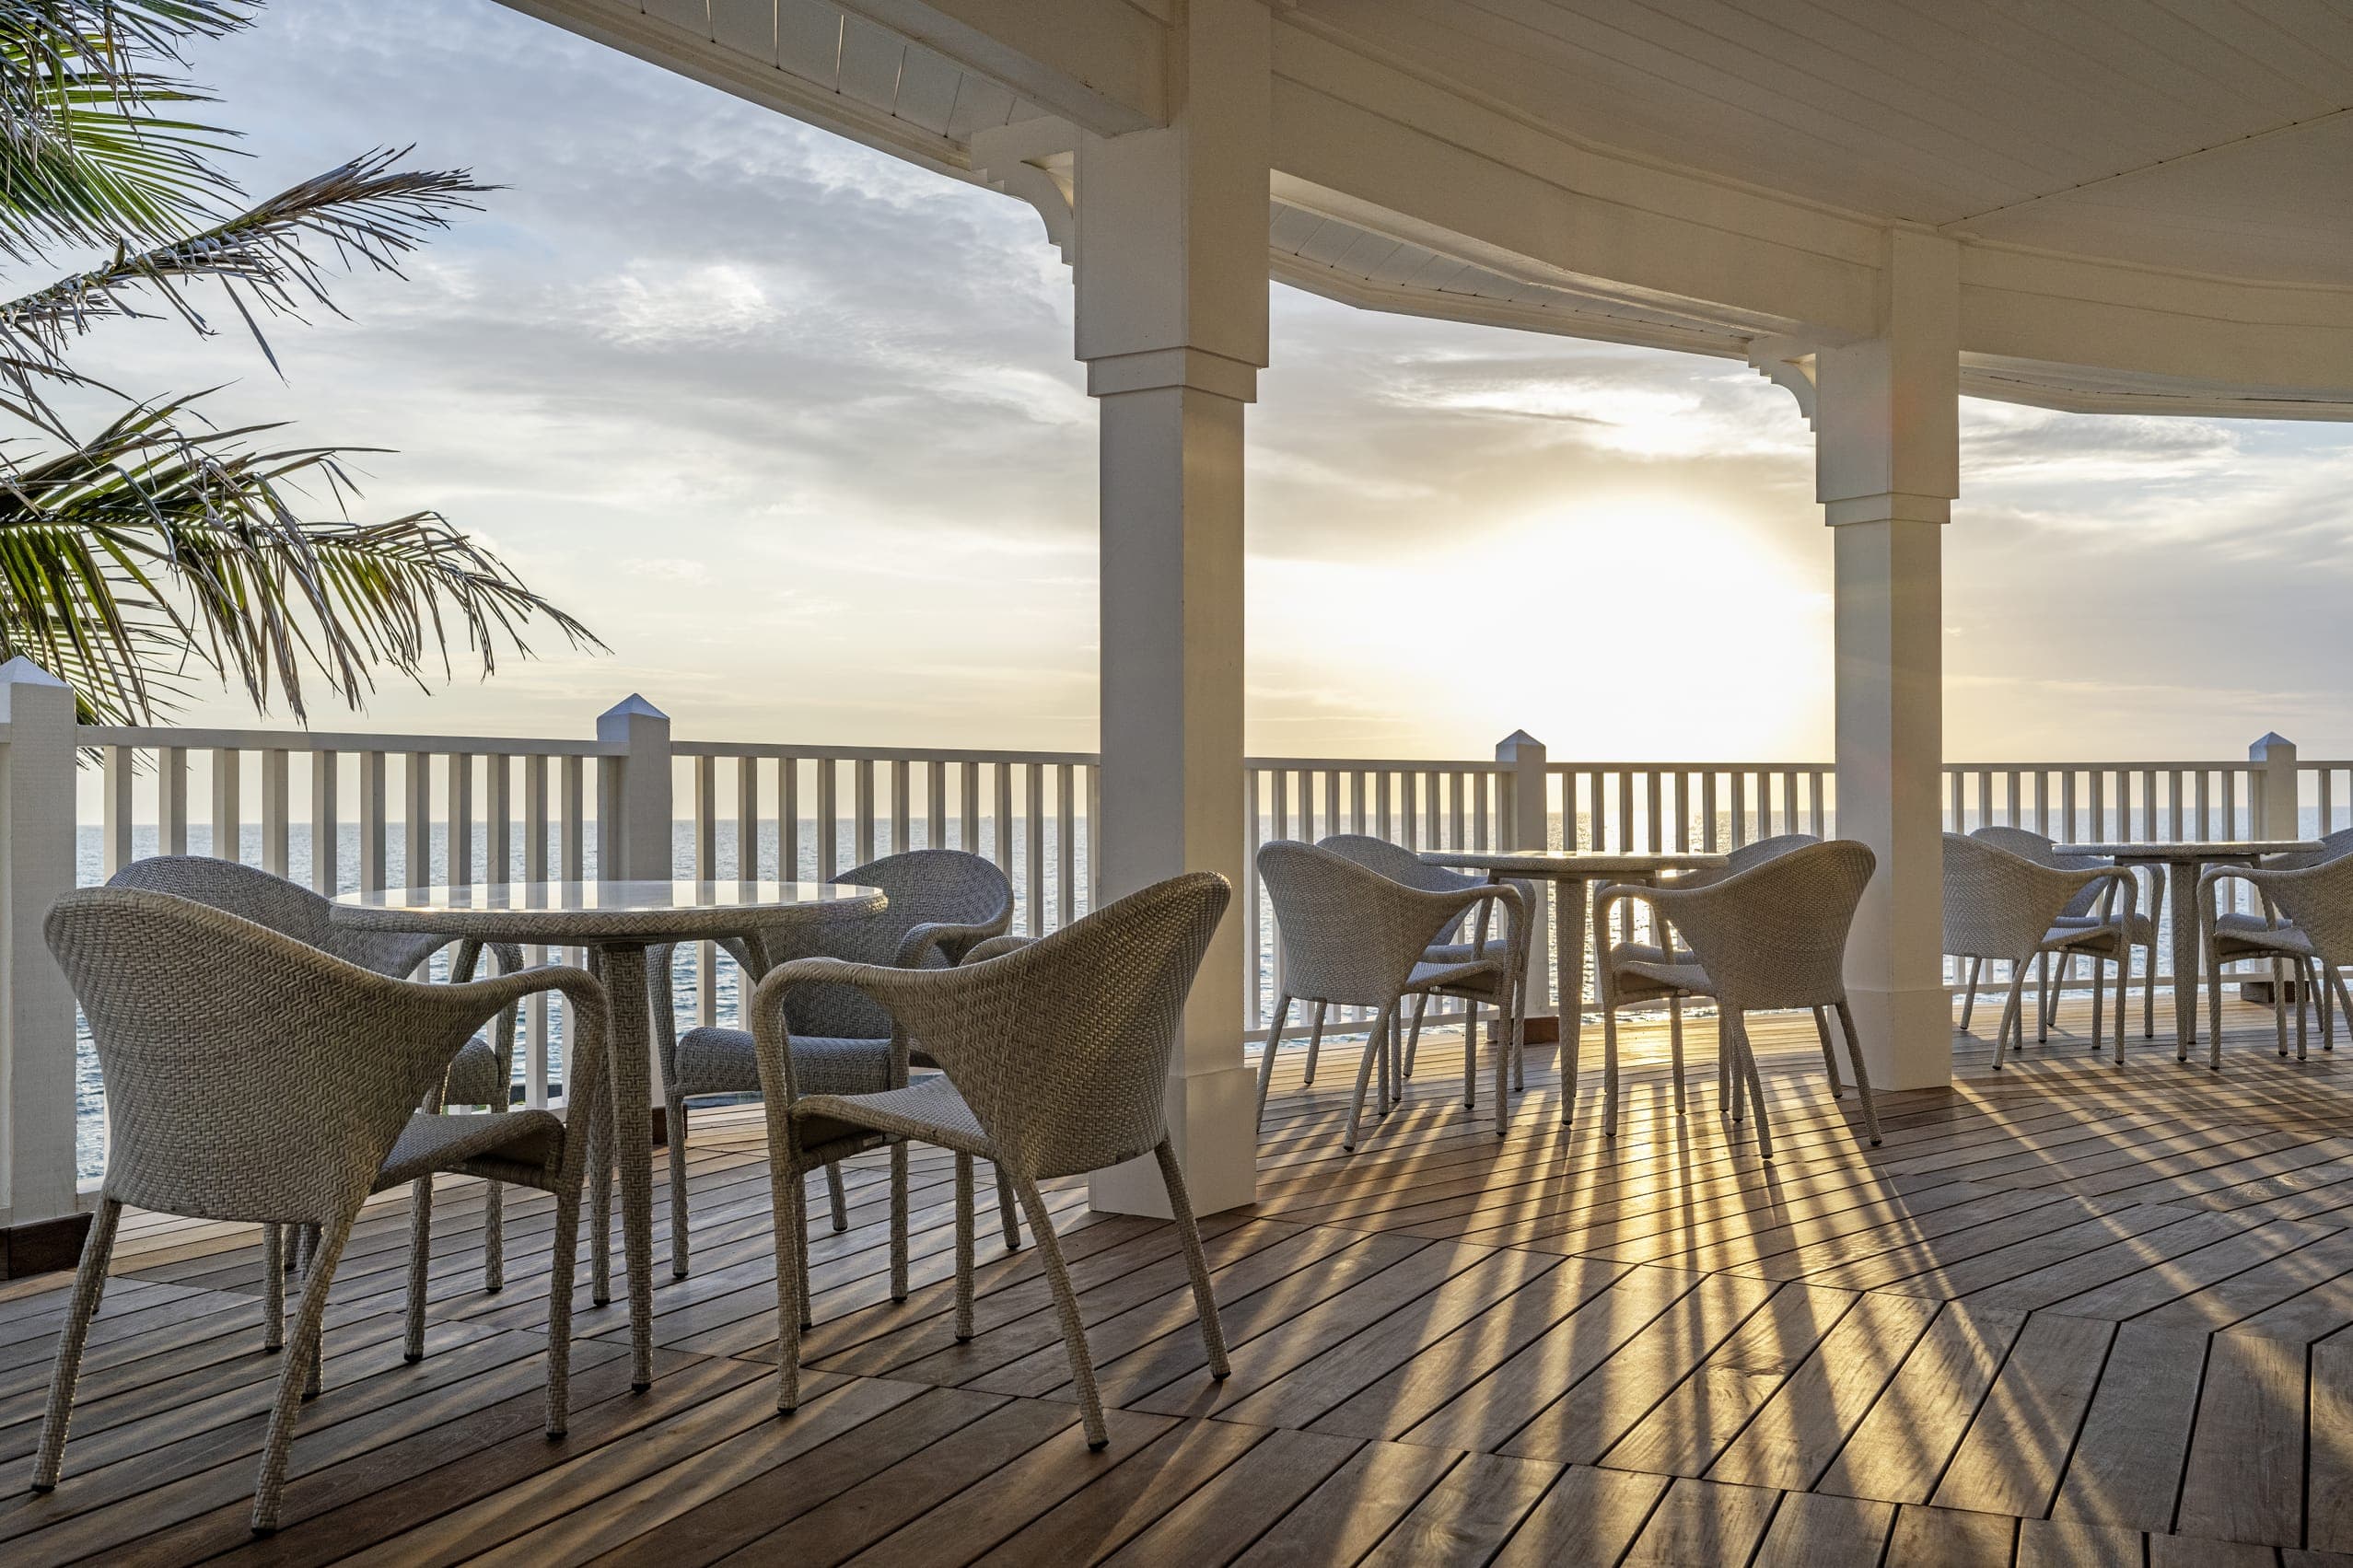 Wicker Chairs And Circular Dining Tables With Sunset Balcony View